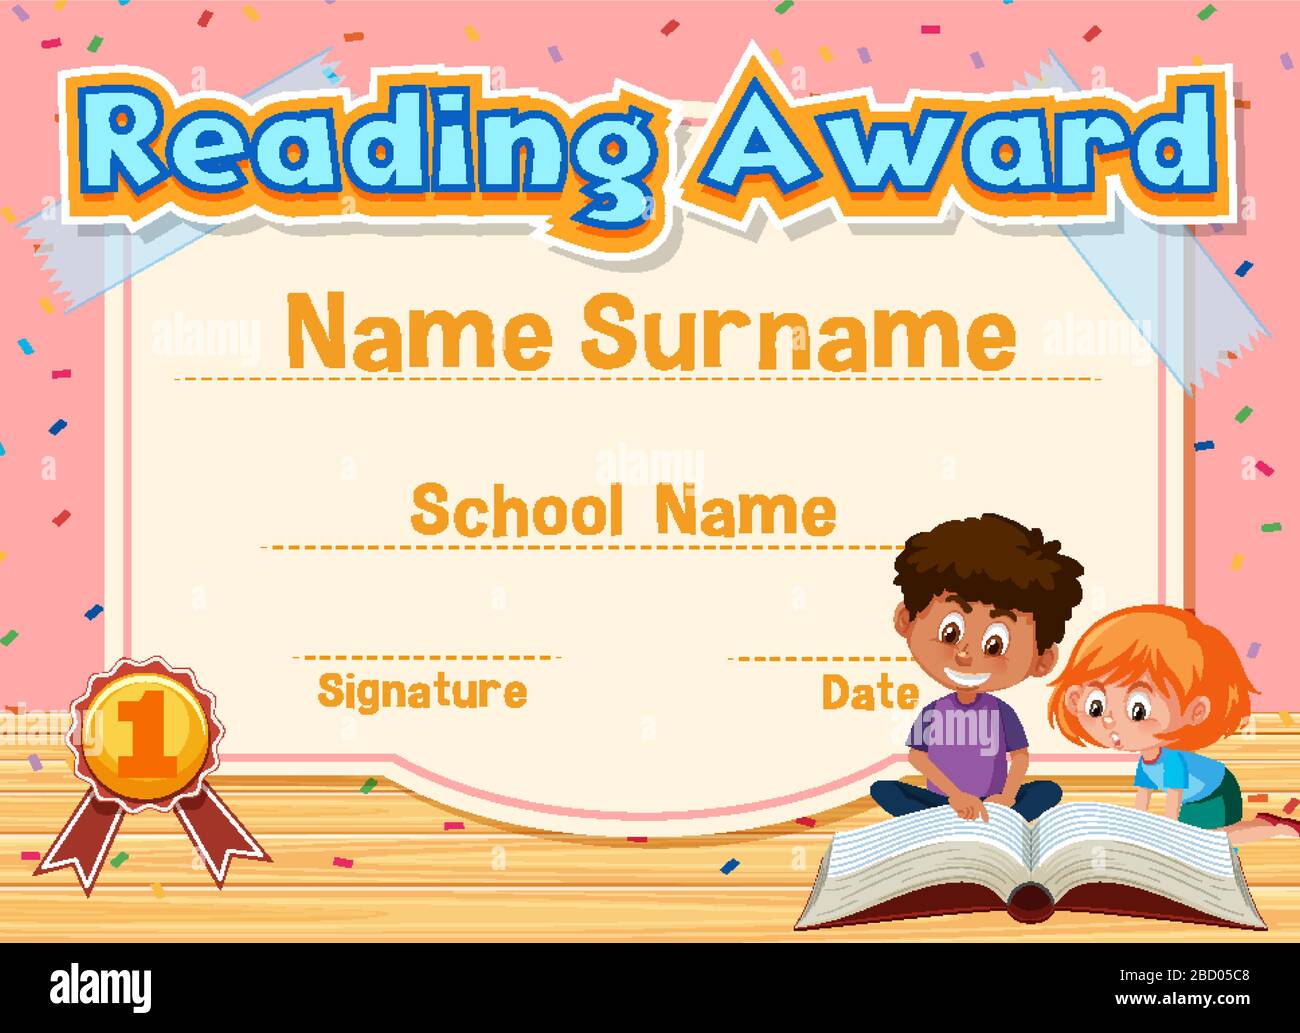 Certificate template for reading award with kids reading books in background illustration Stock Vector